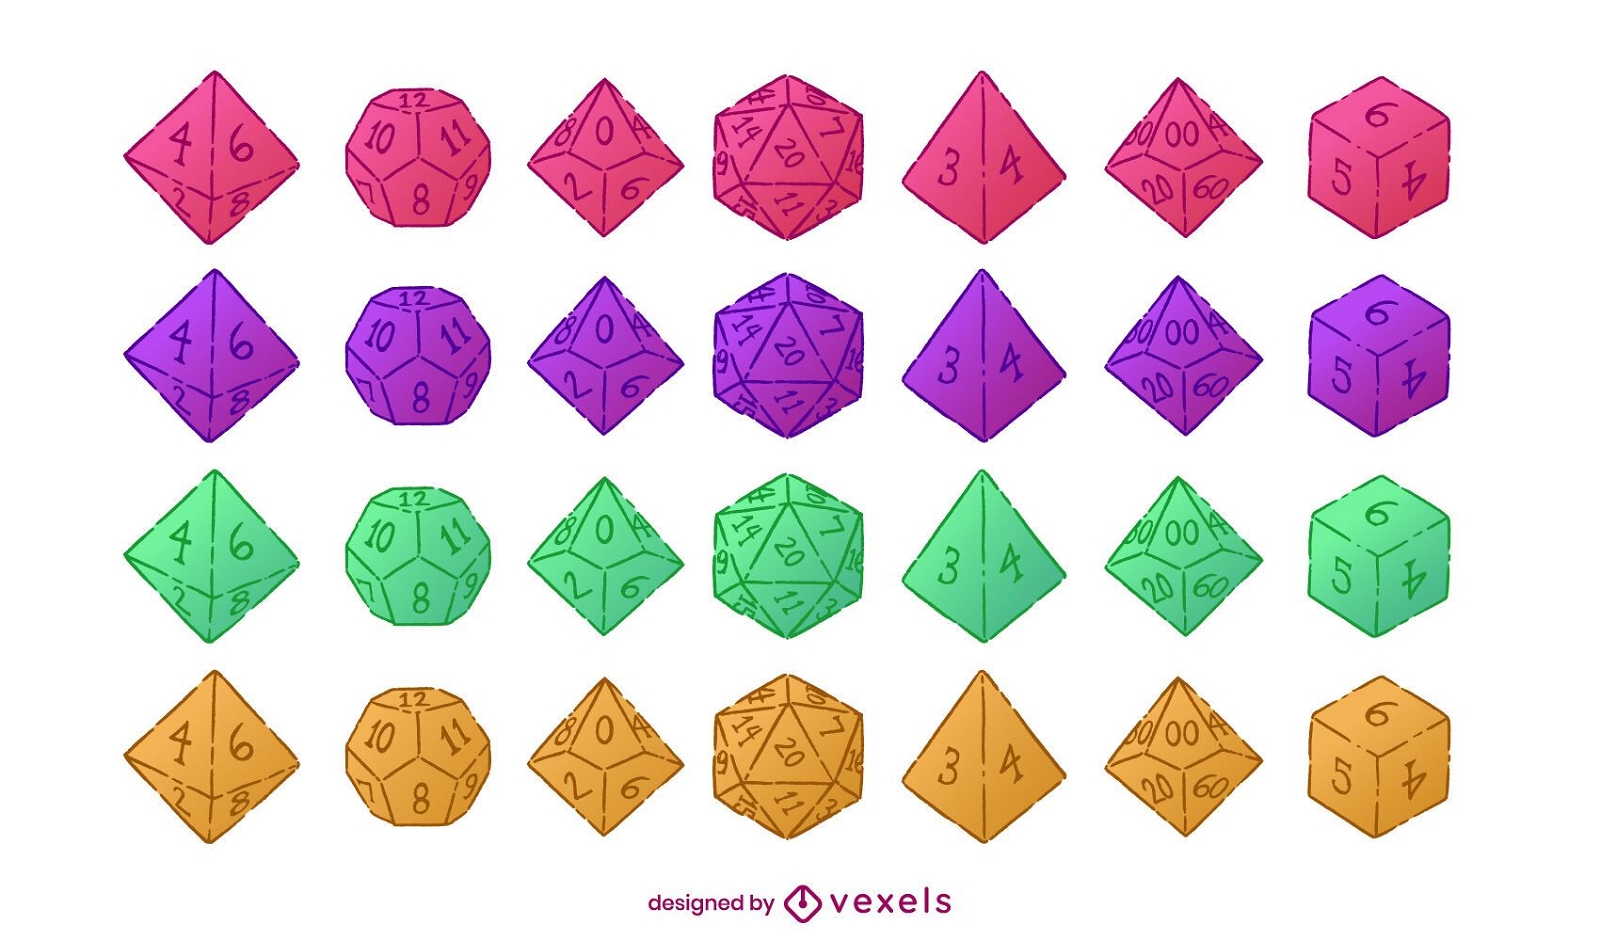 RPG fantasy playing dices illustration